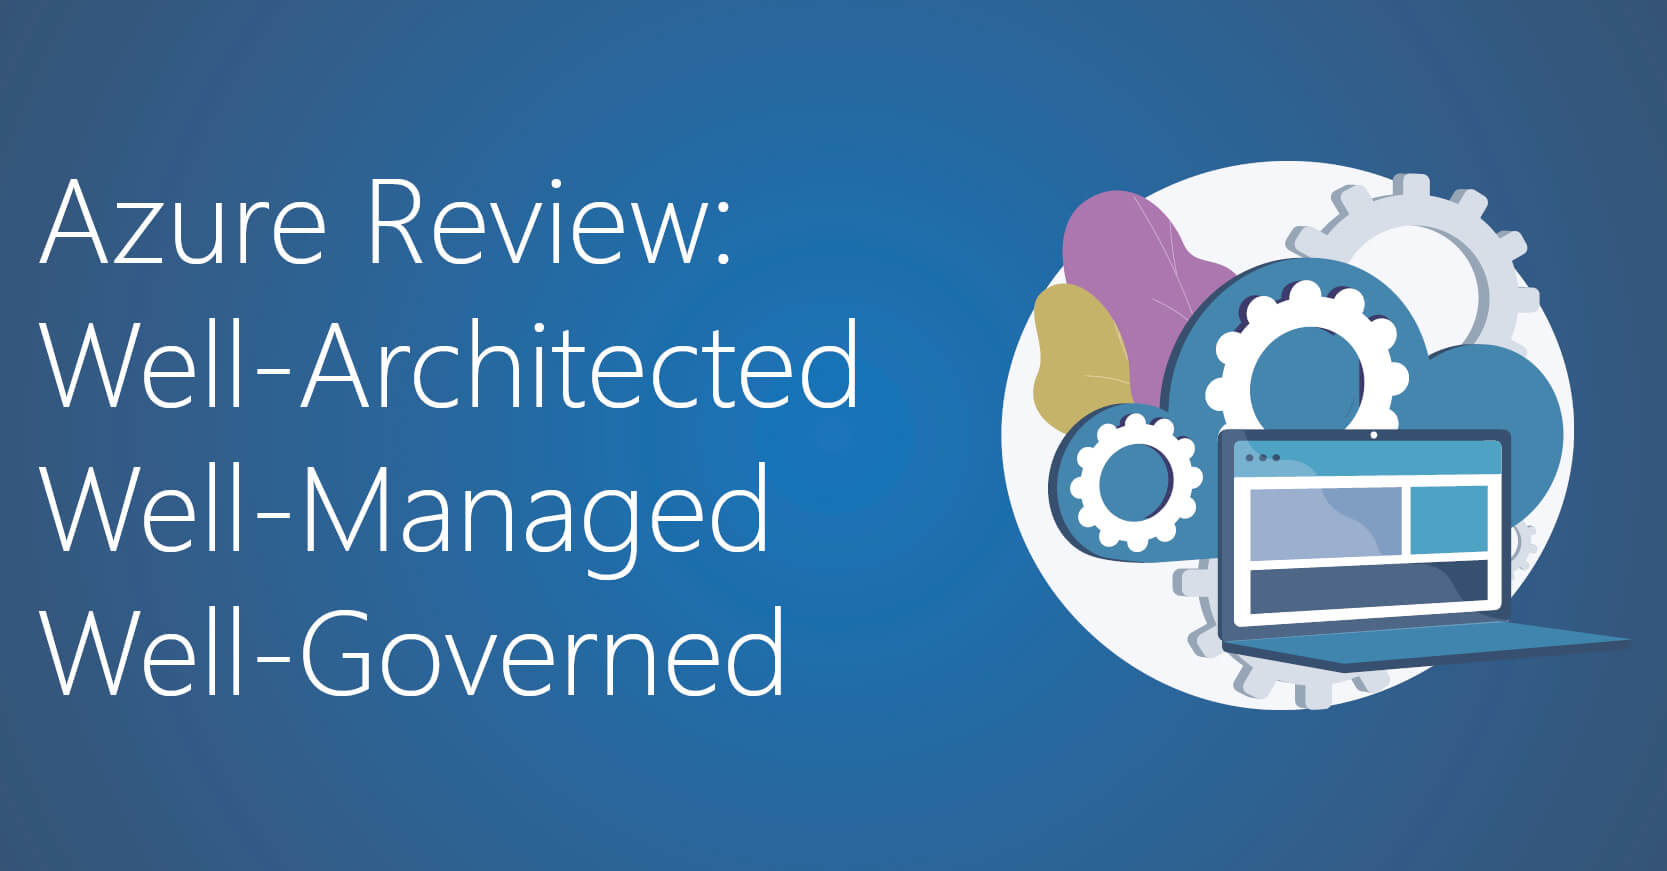 Azure Review Featured Image